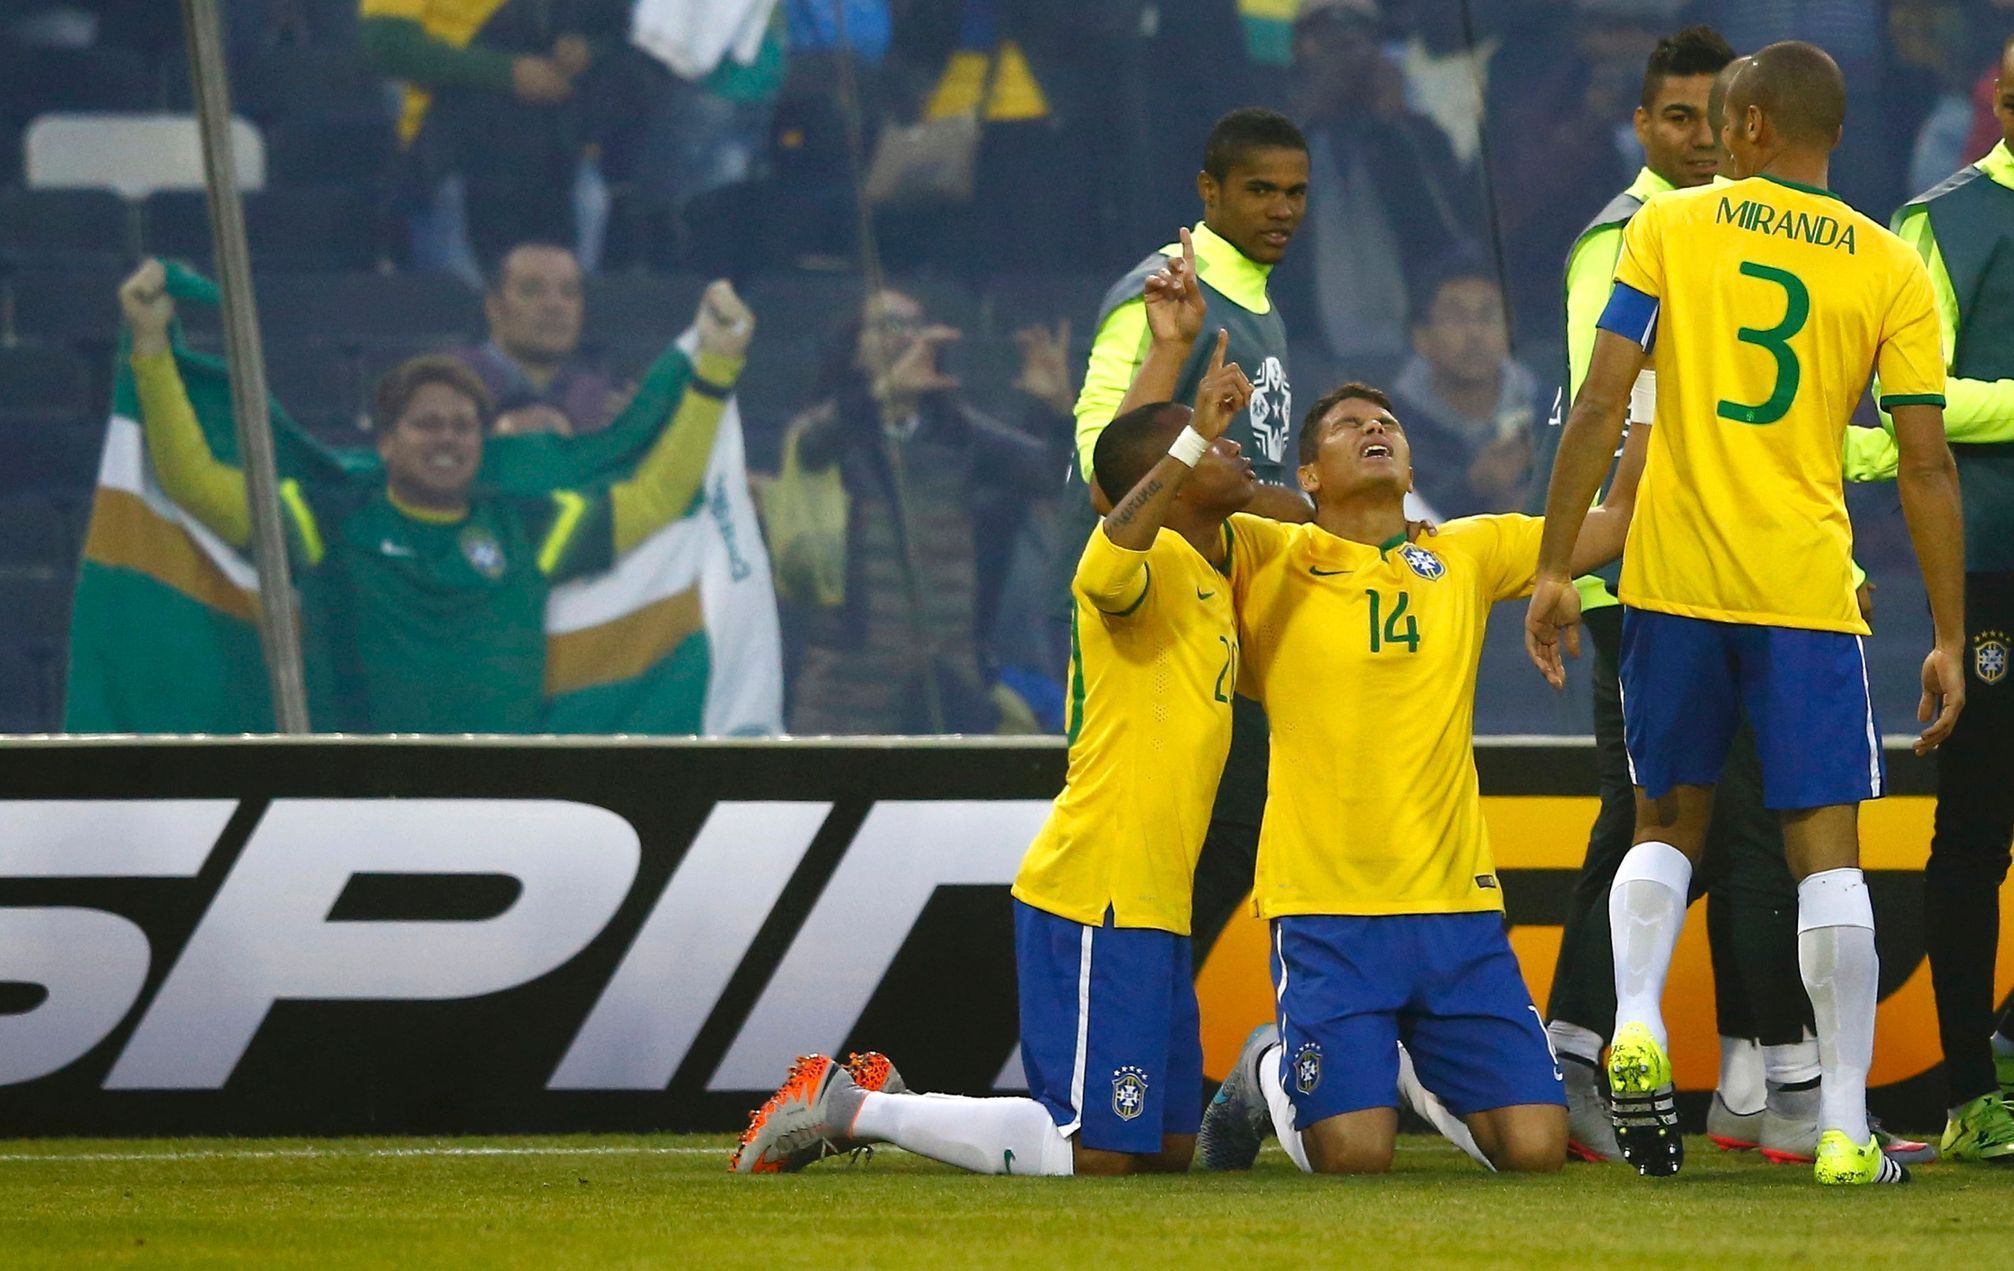 Brazil's Silva celebrates with teammates Robinho and Miranda after scoring a goal against Venezuela during their first round Copa America 2015 soccer match at Estadio Monumental David Arellano in Sant